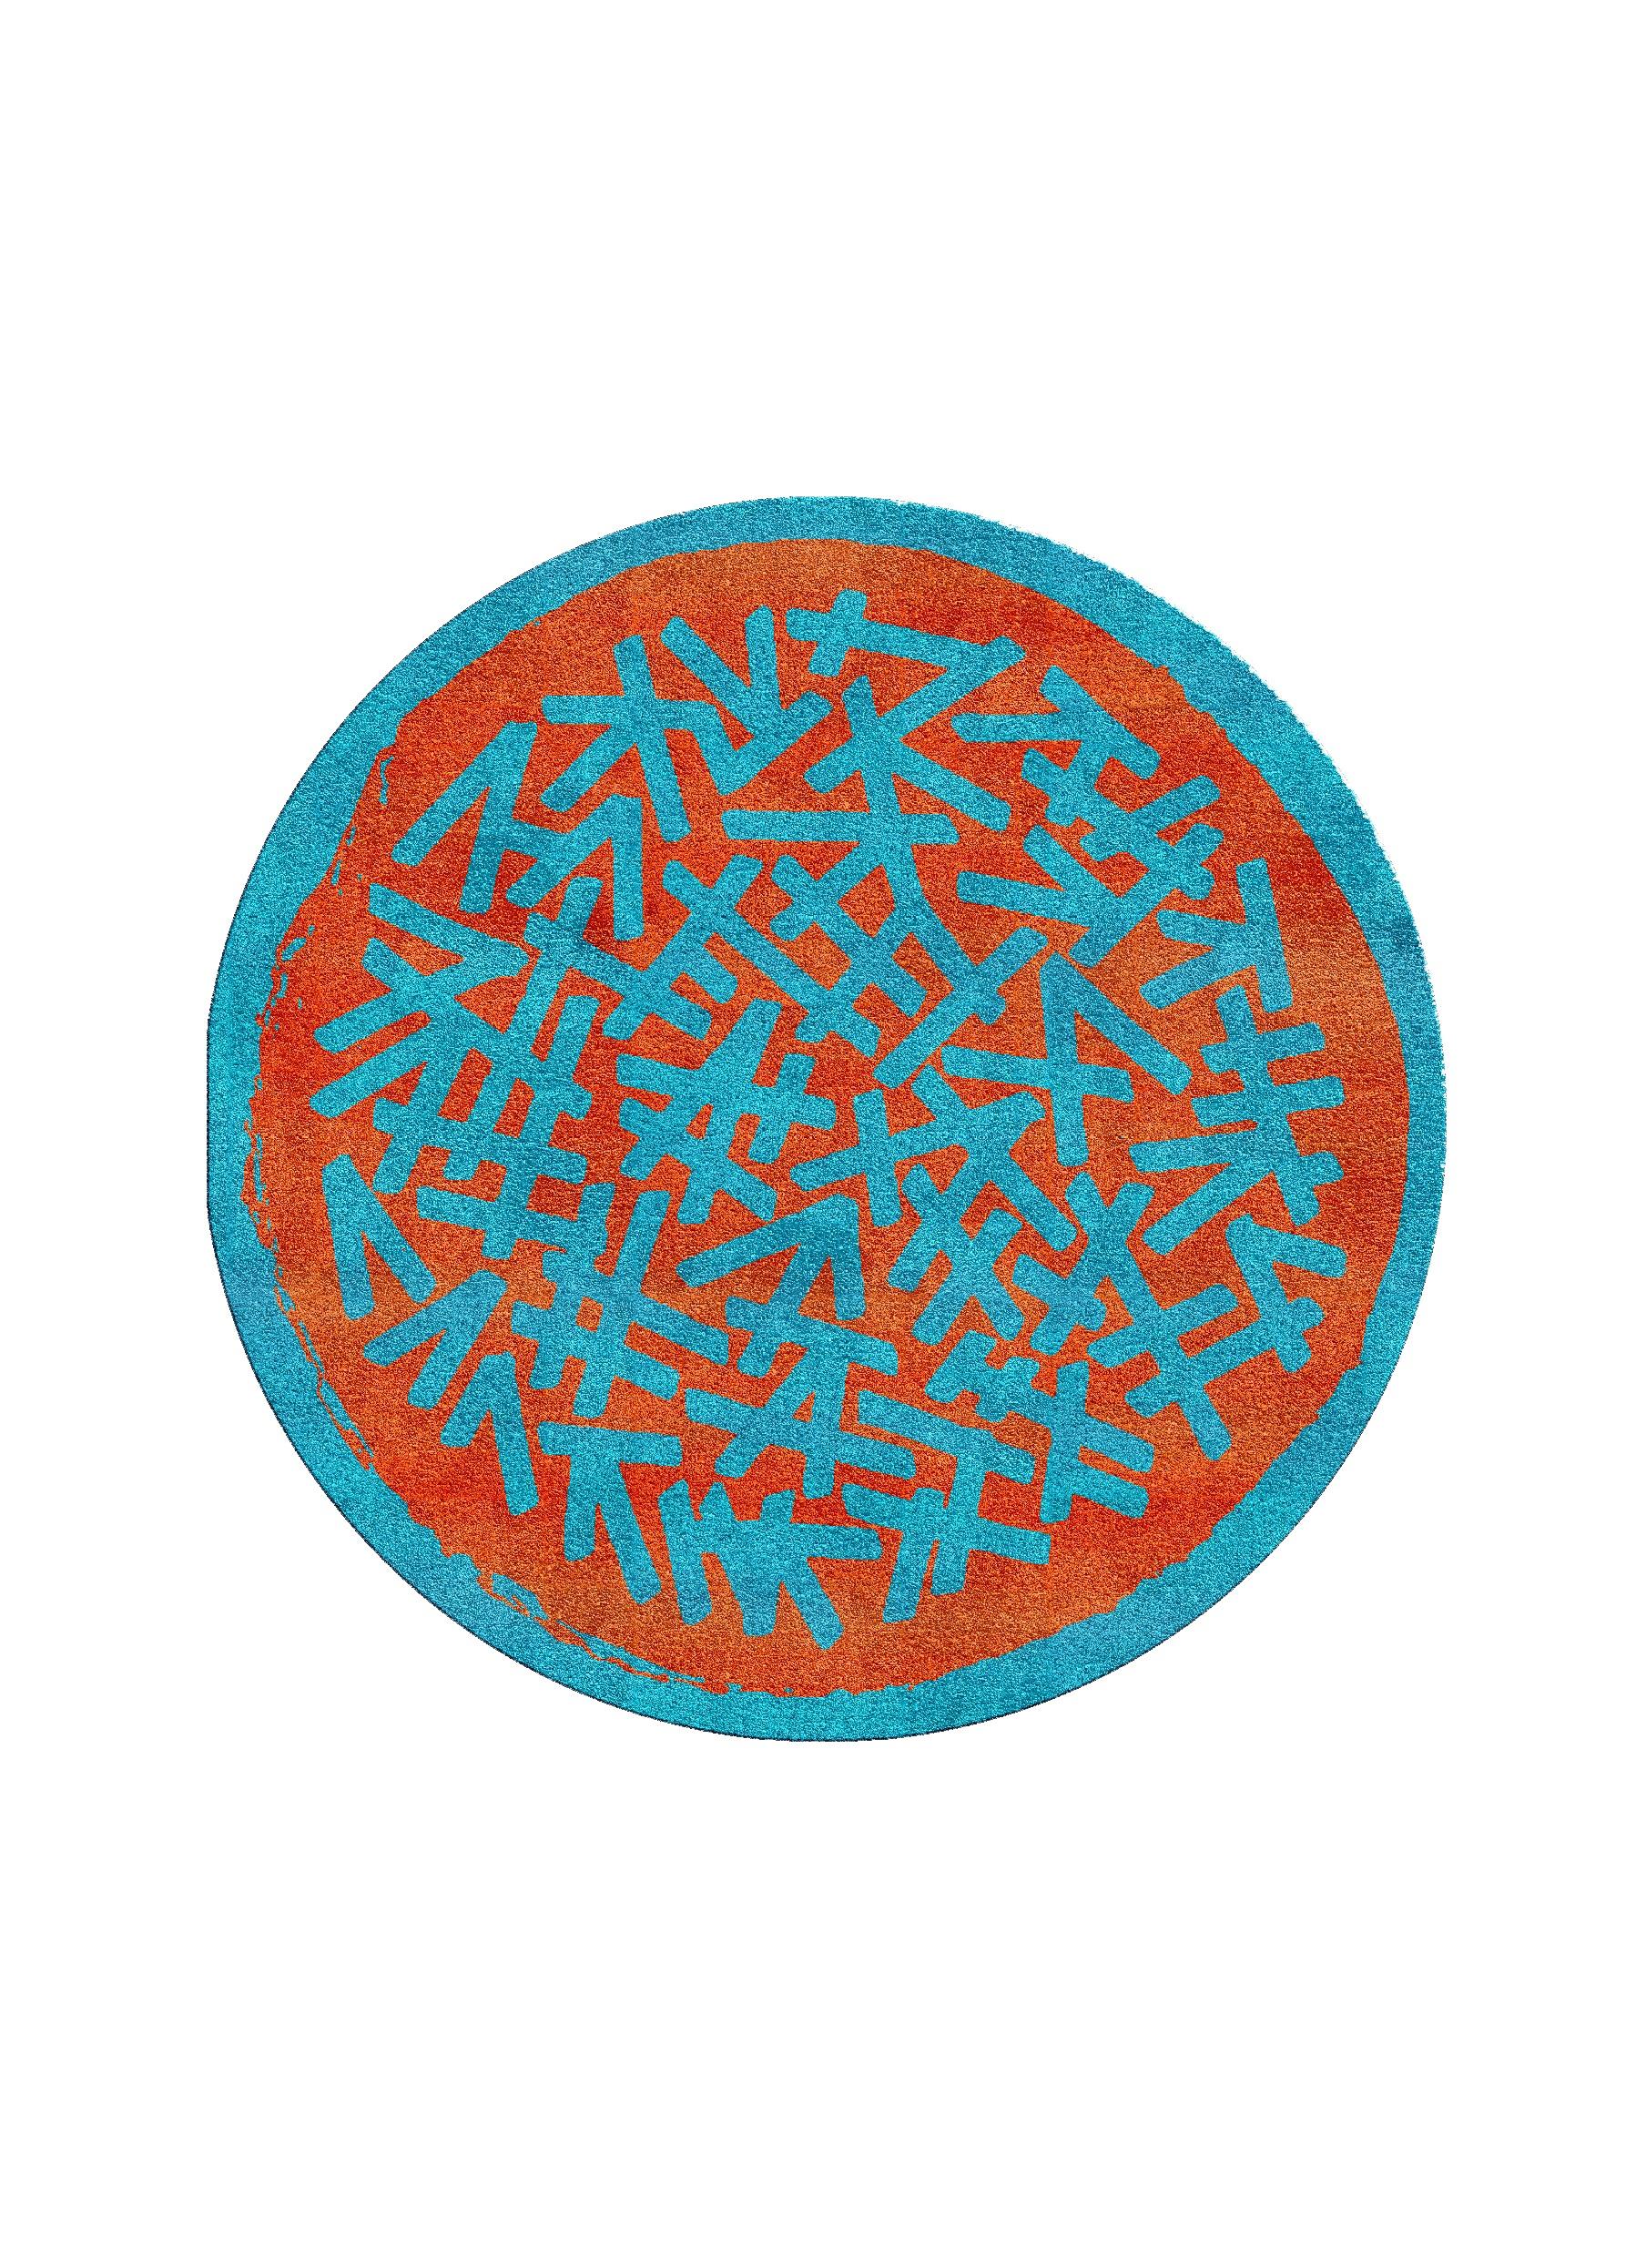 Other Circular Rug IV by Raul For Sale